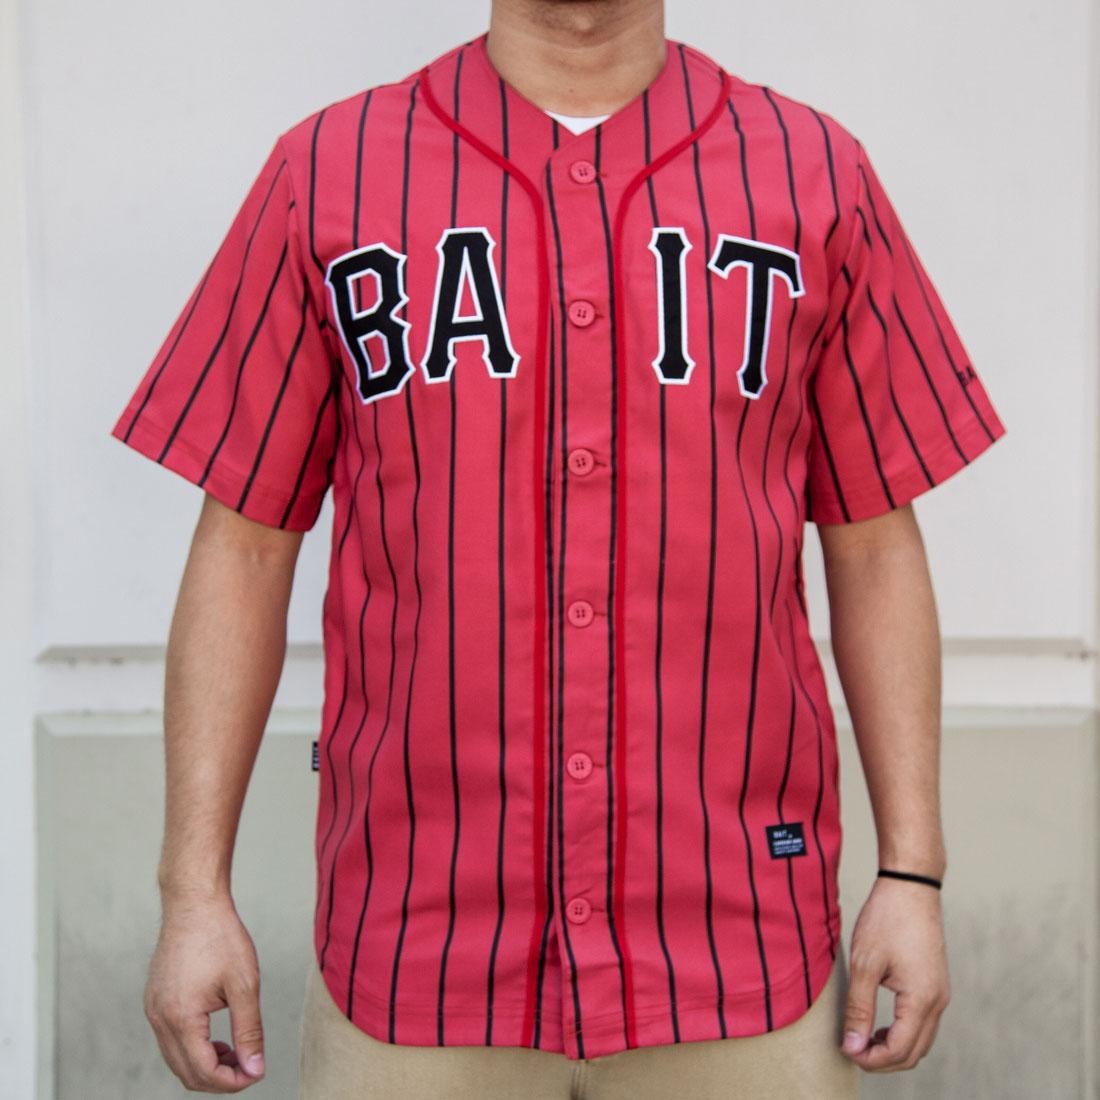 red and white pinstripe baseball jersey